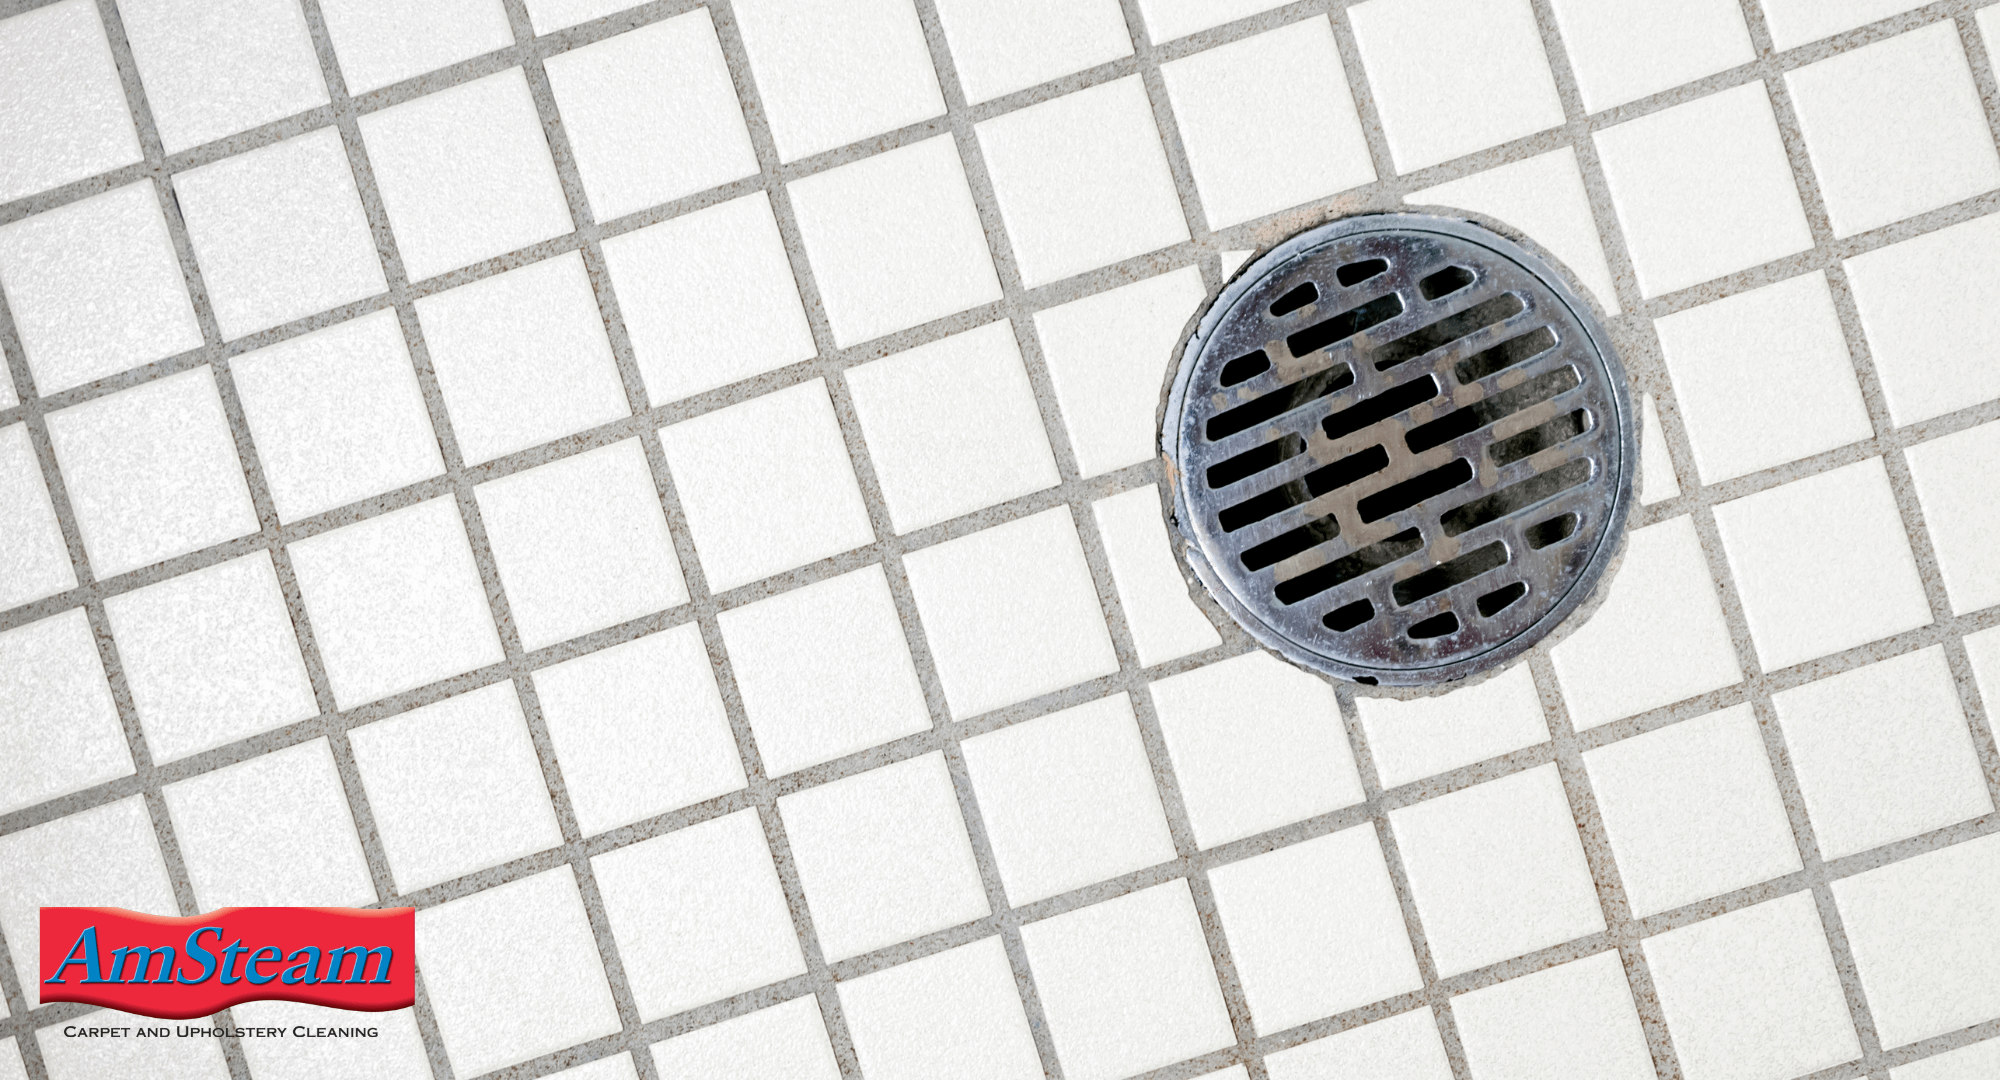 Keep a floor drain clear so water can flow out easily.